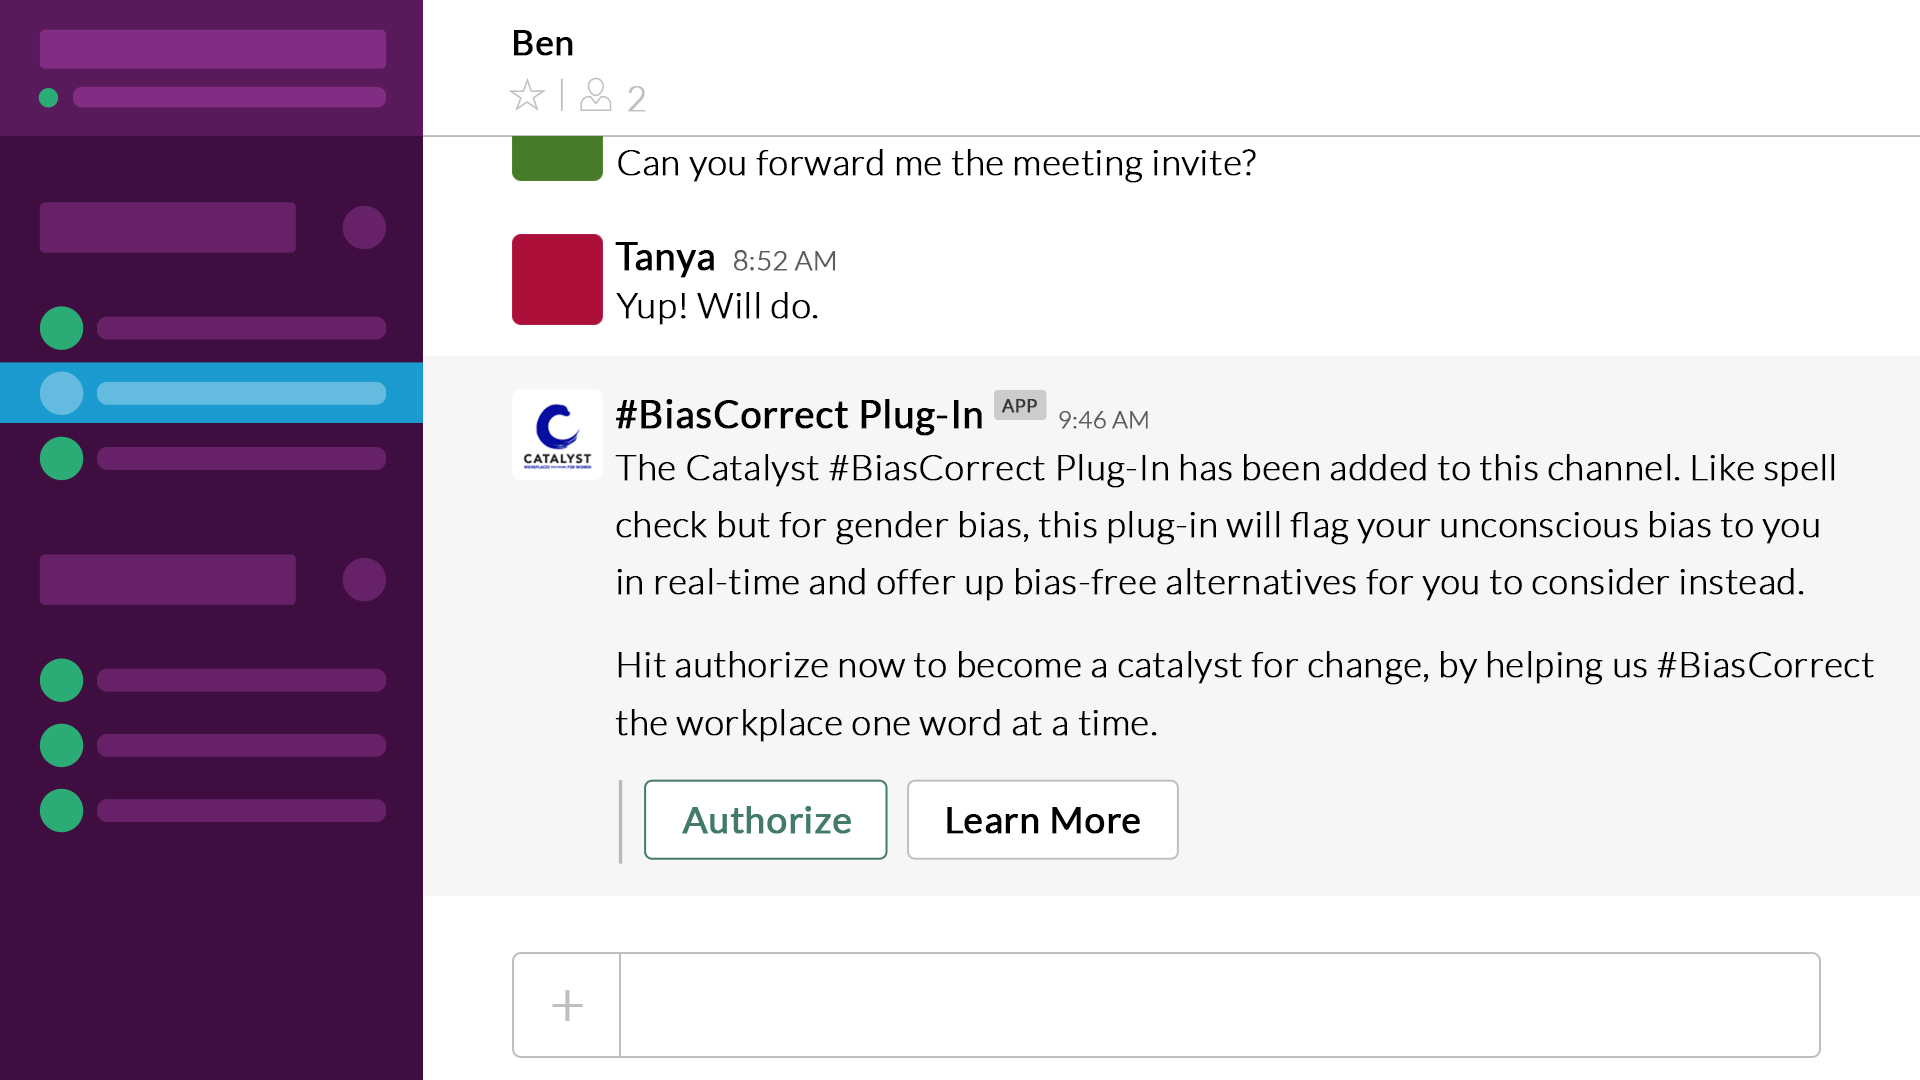 Image of Slack App with a welcome message from the #BiasCorrect plug-in once it has successfully been added to a Slack channel.